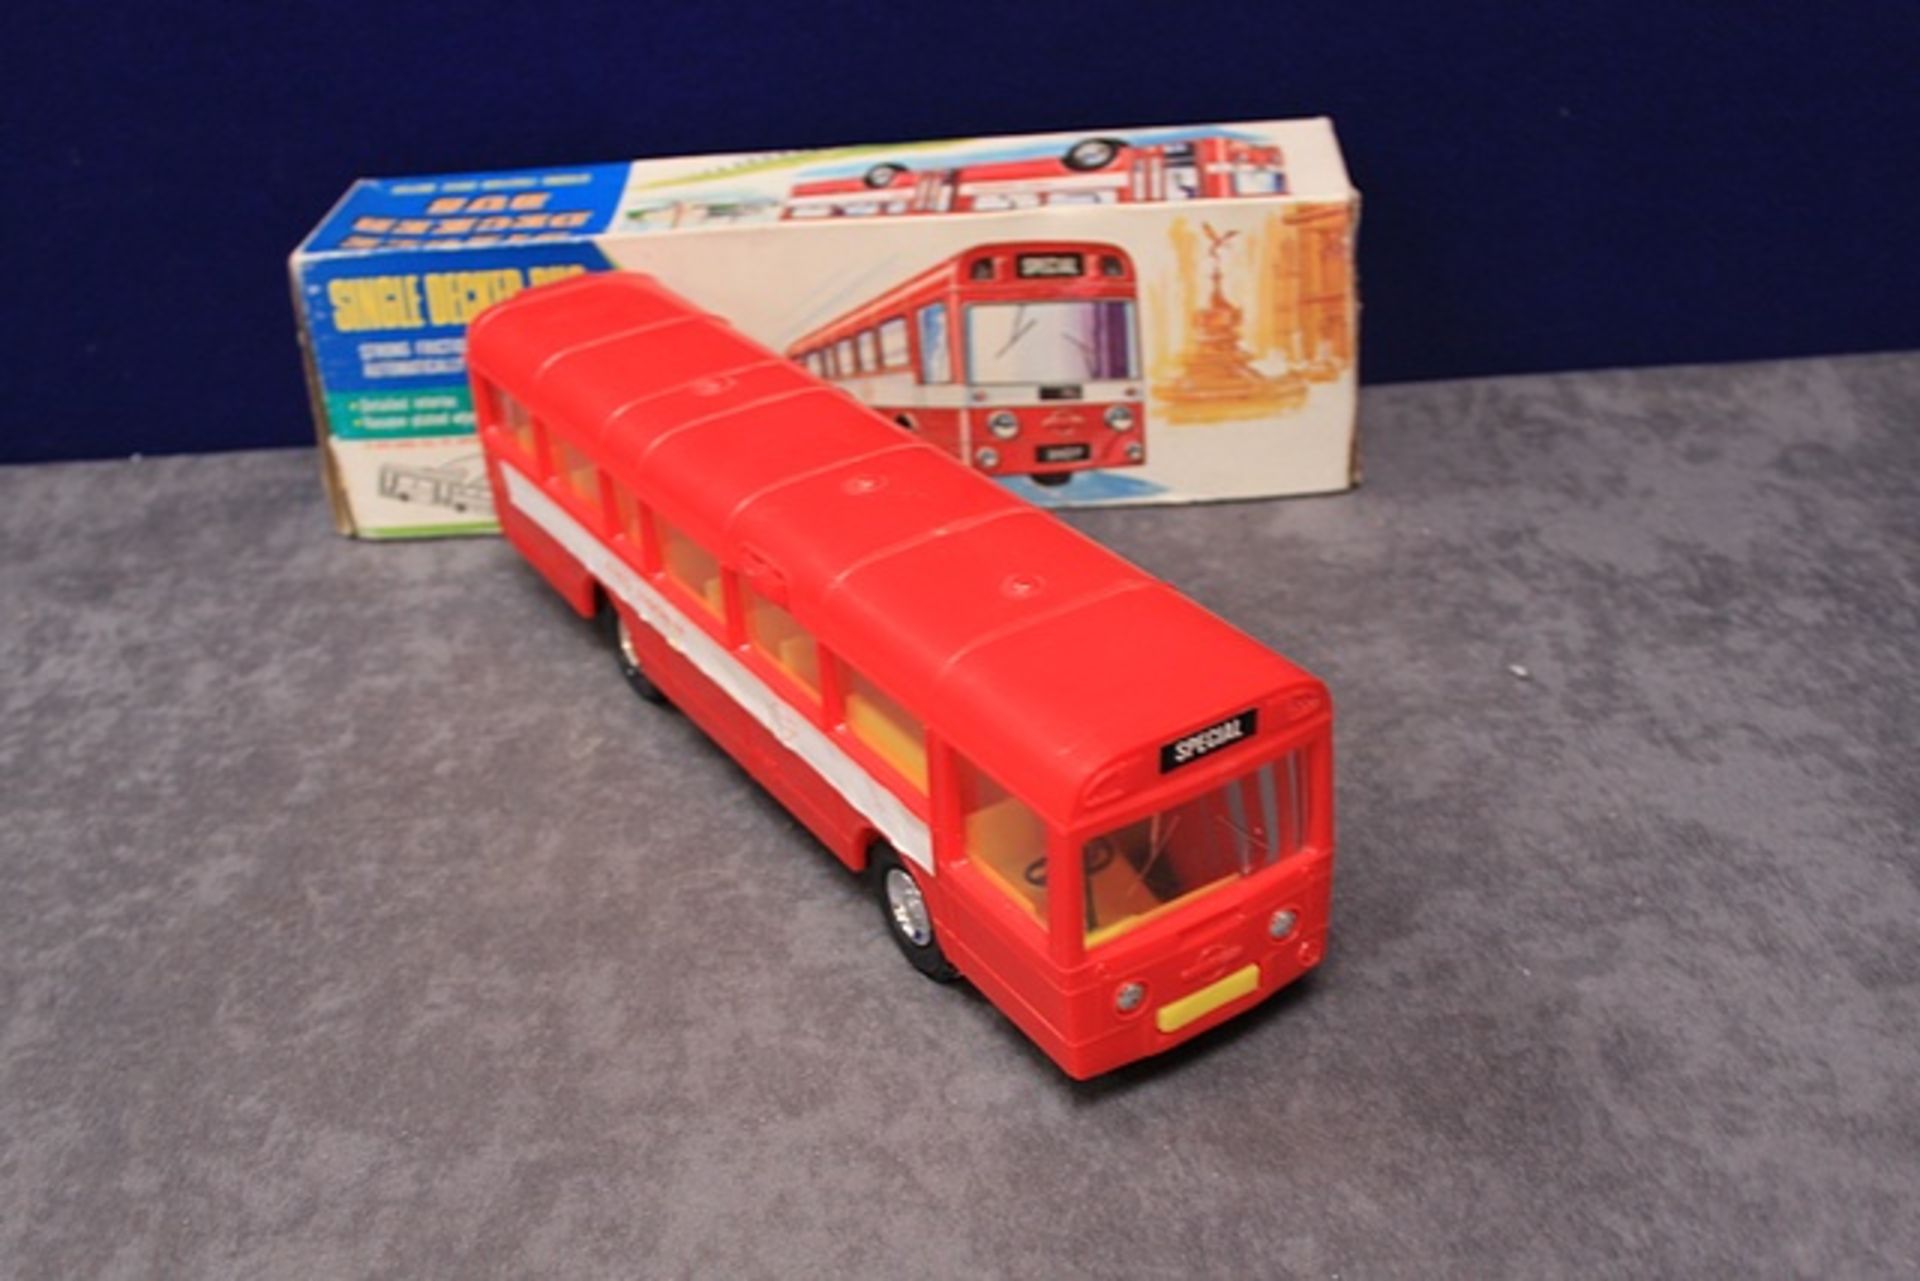 Friction Red Arrow Single Decker Bus No 3107 Made In Hong Kong With Box